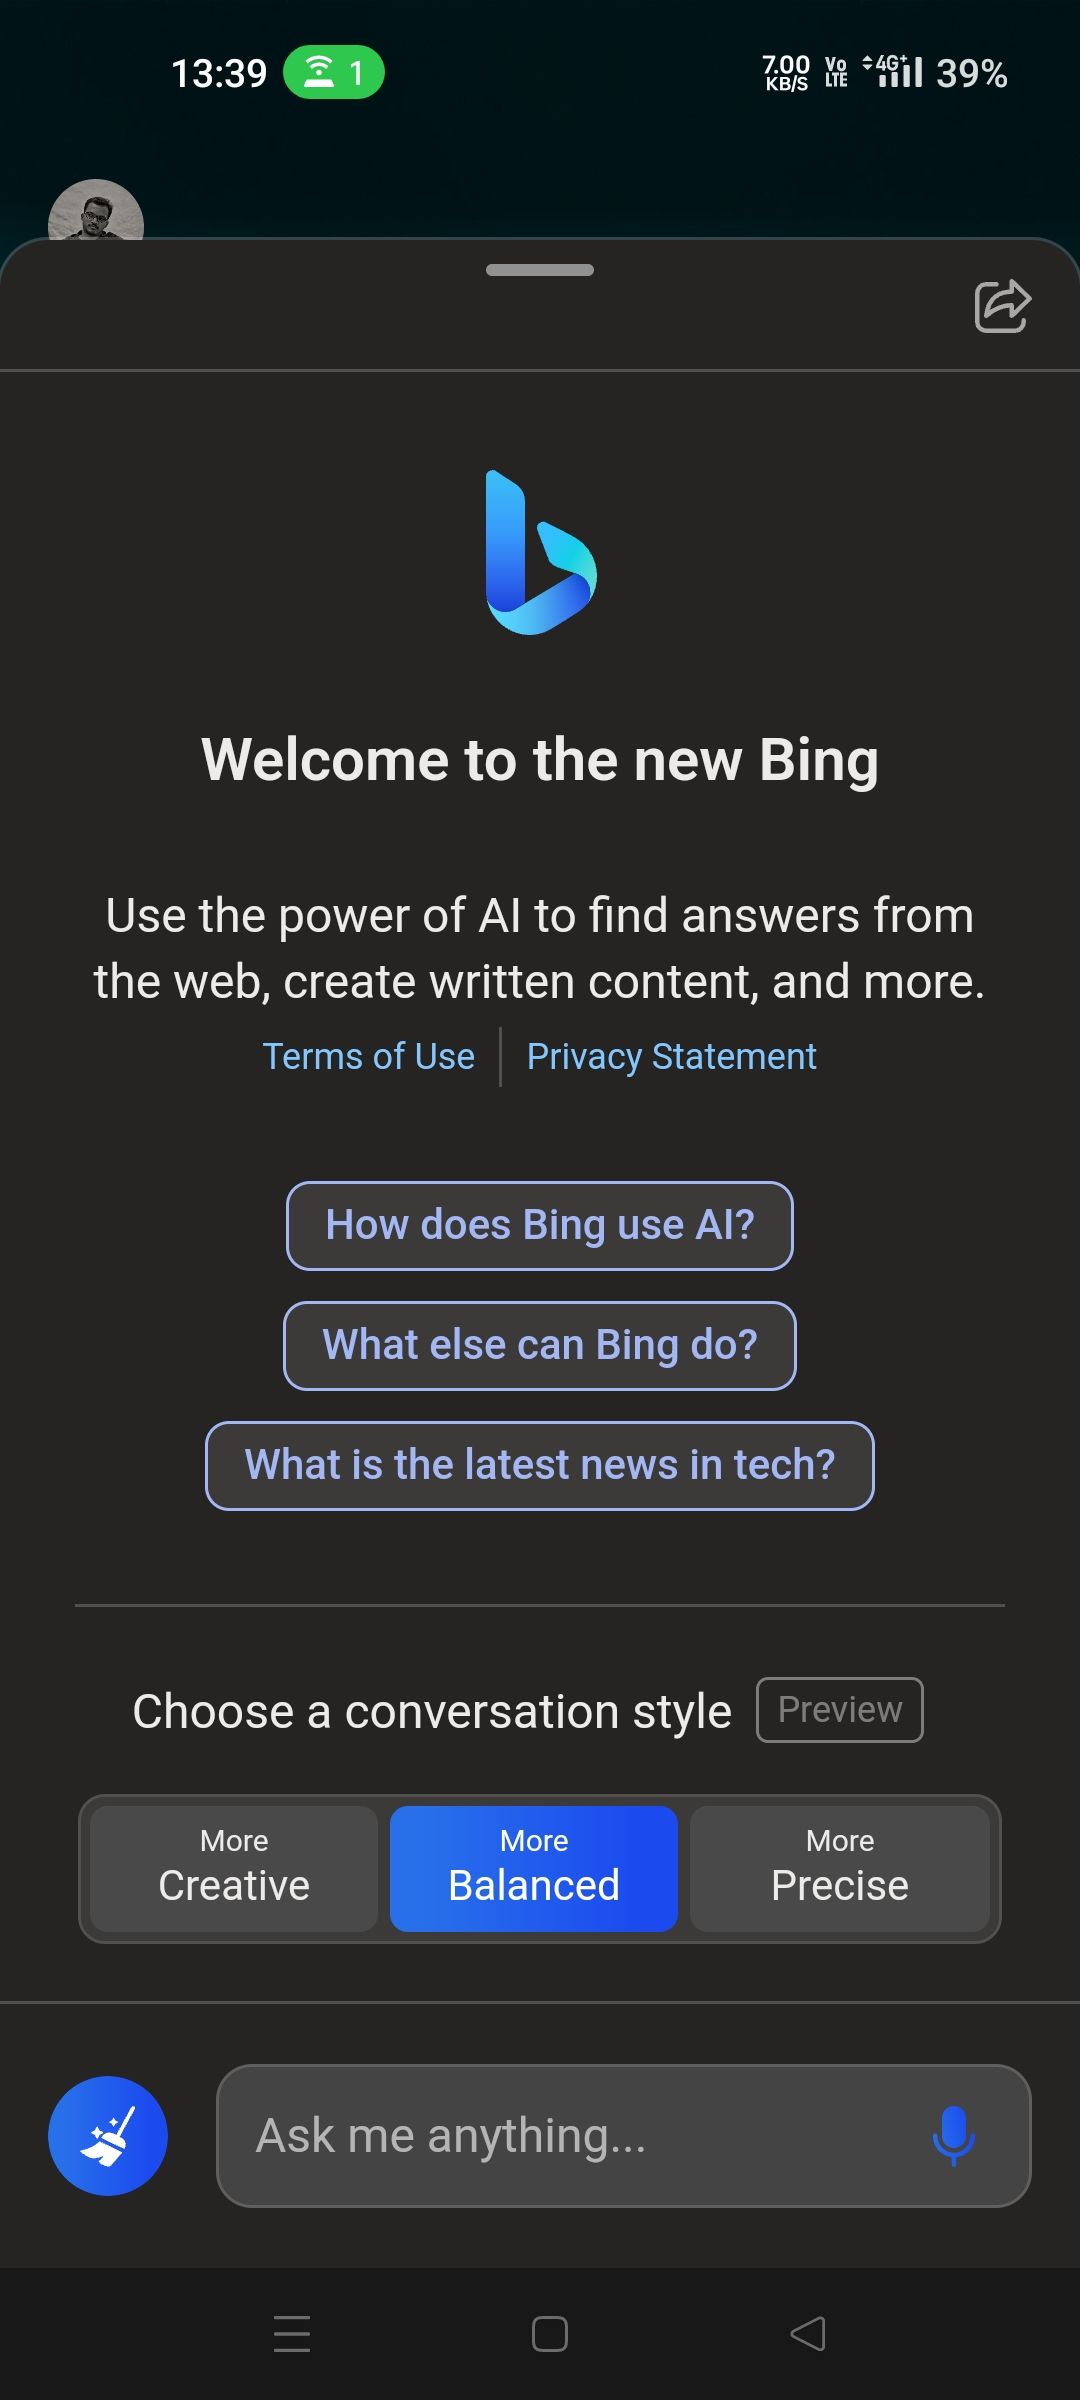 A screenshot of the Bing chat interface on an Android phone.